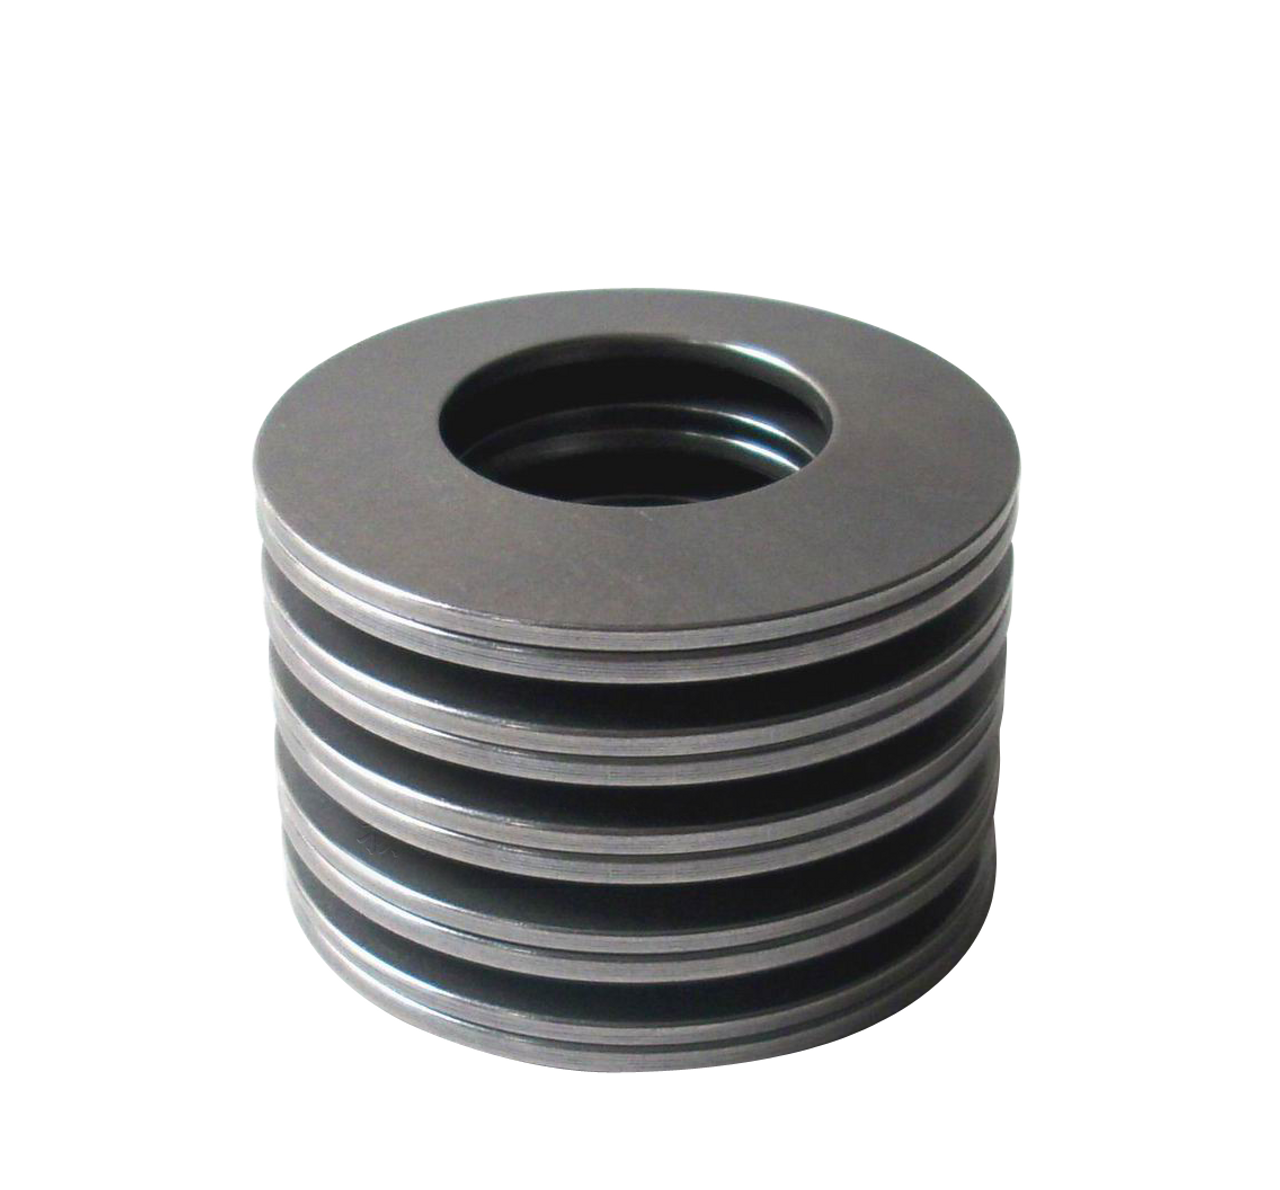 40mm Disc Spring (DIN 2093) Conical Washer  DS041.0-080-04